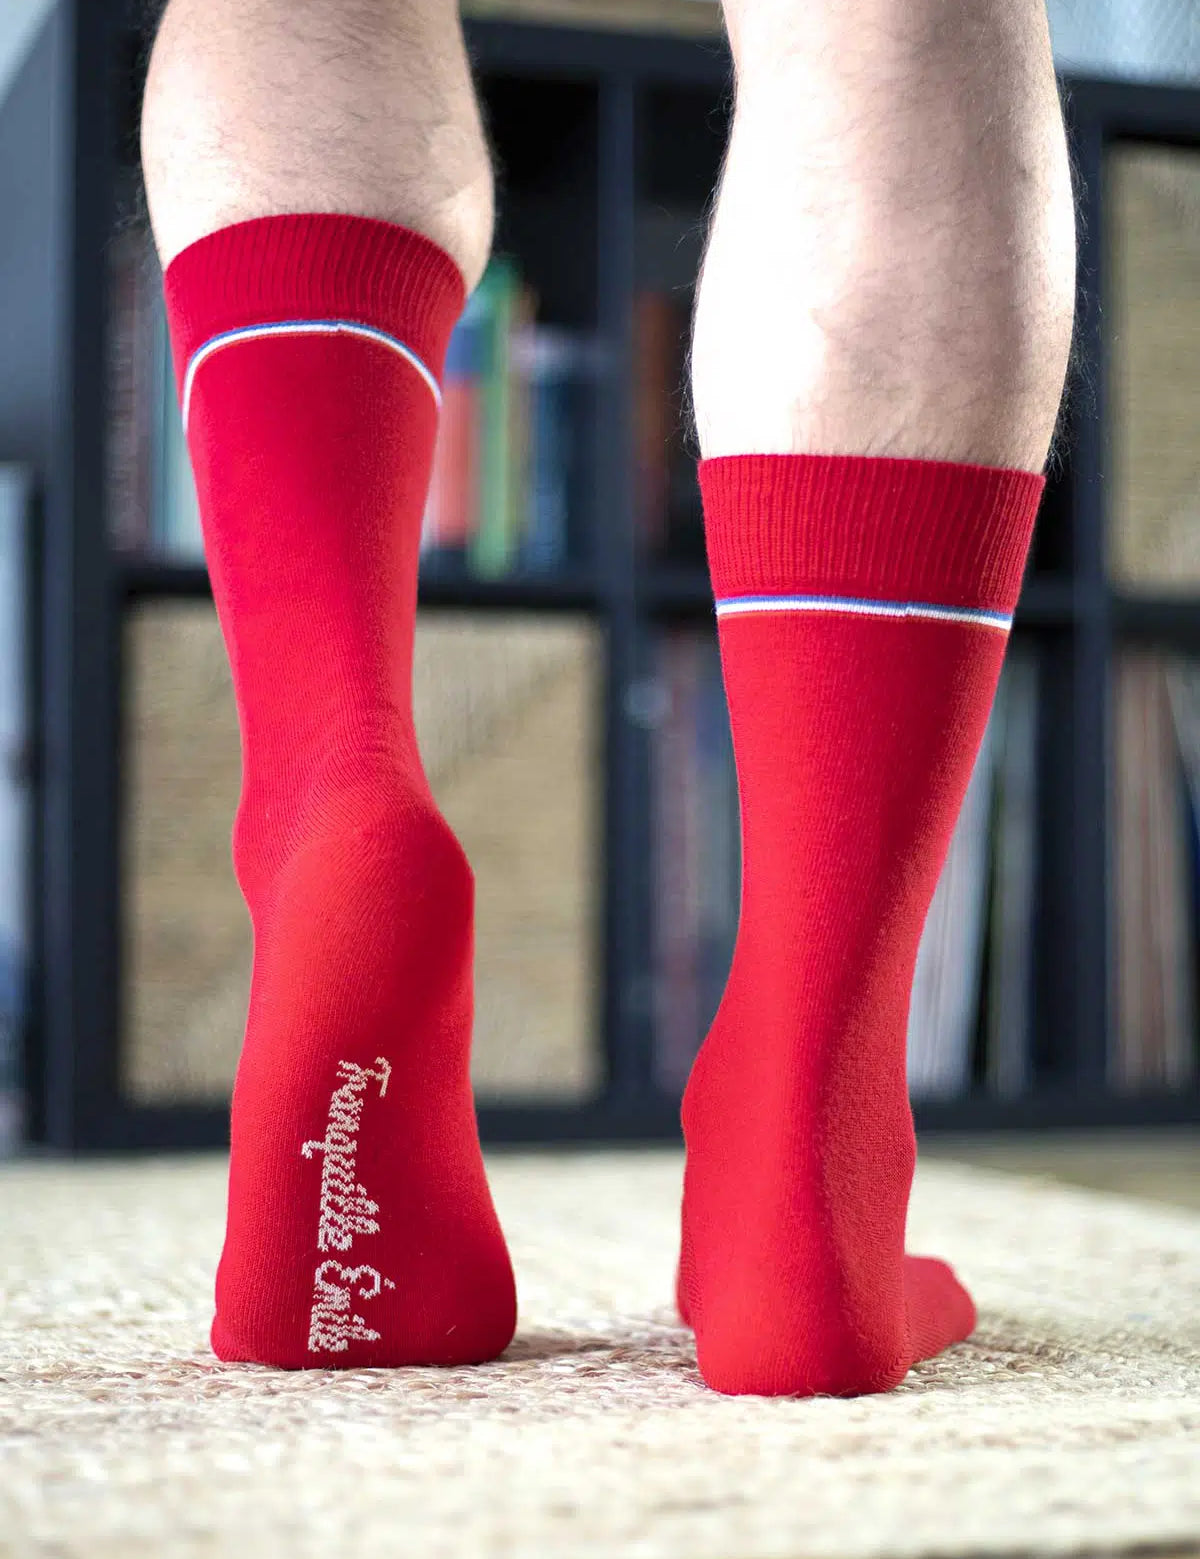 chaussettes-made-in-france-les-unies-rouge-vif-2_jpg.webp